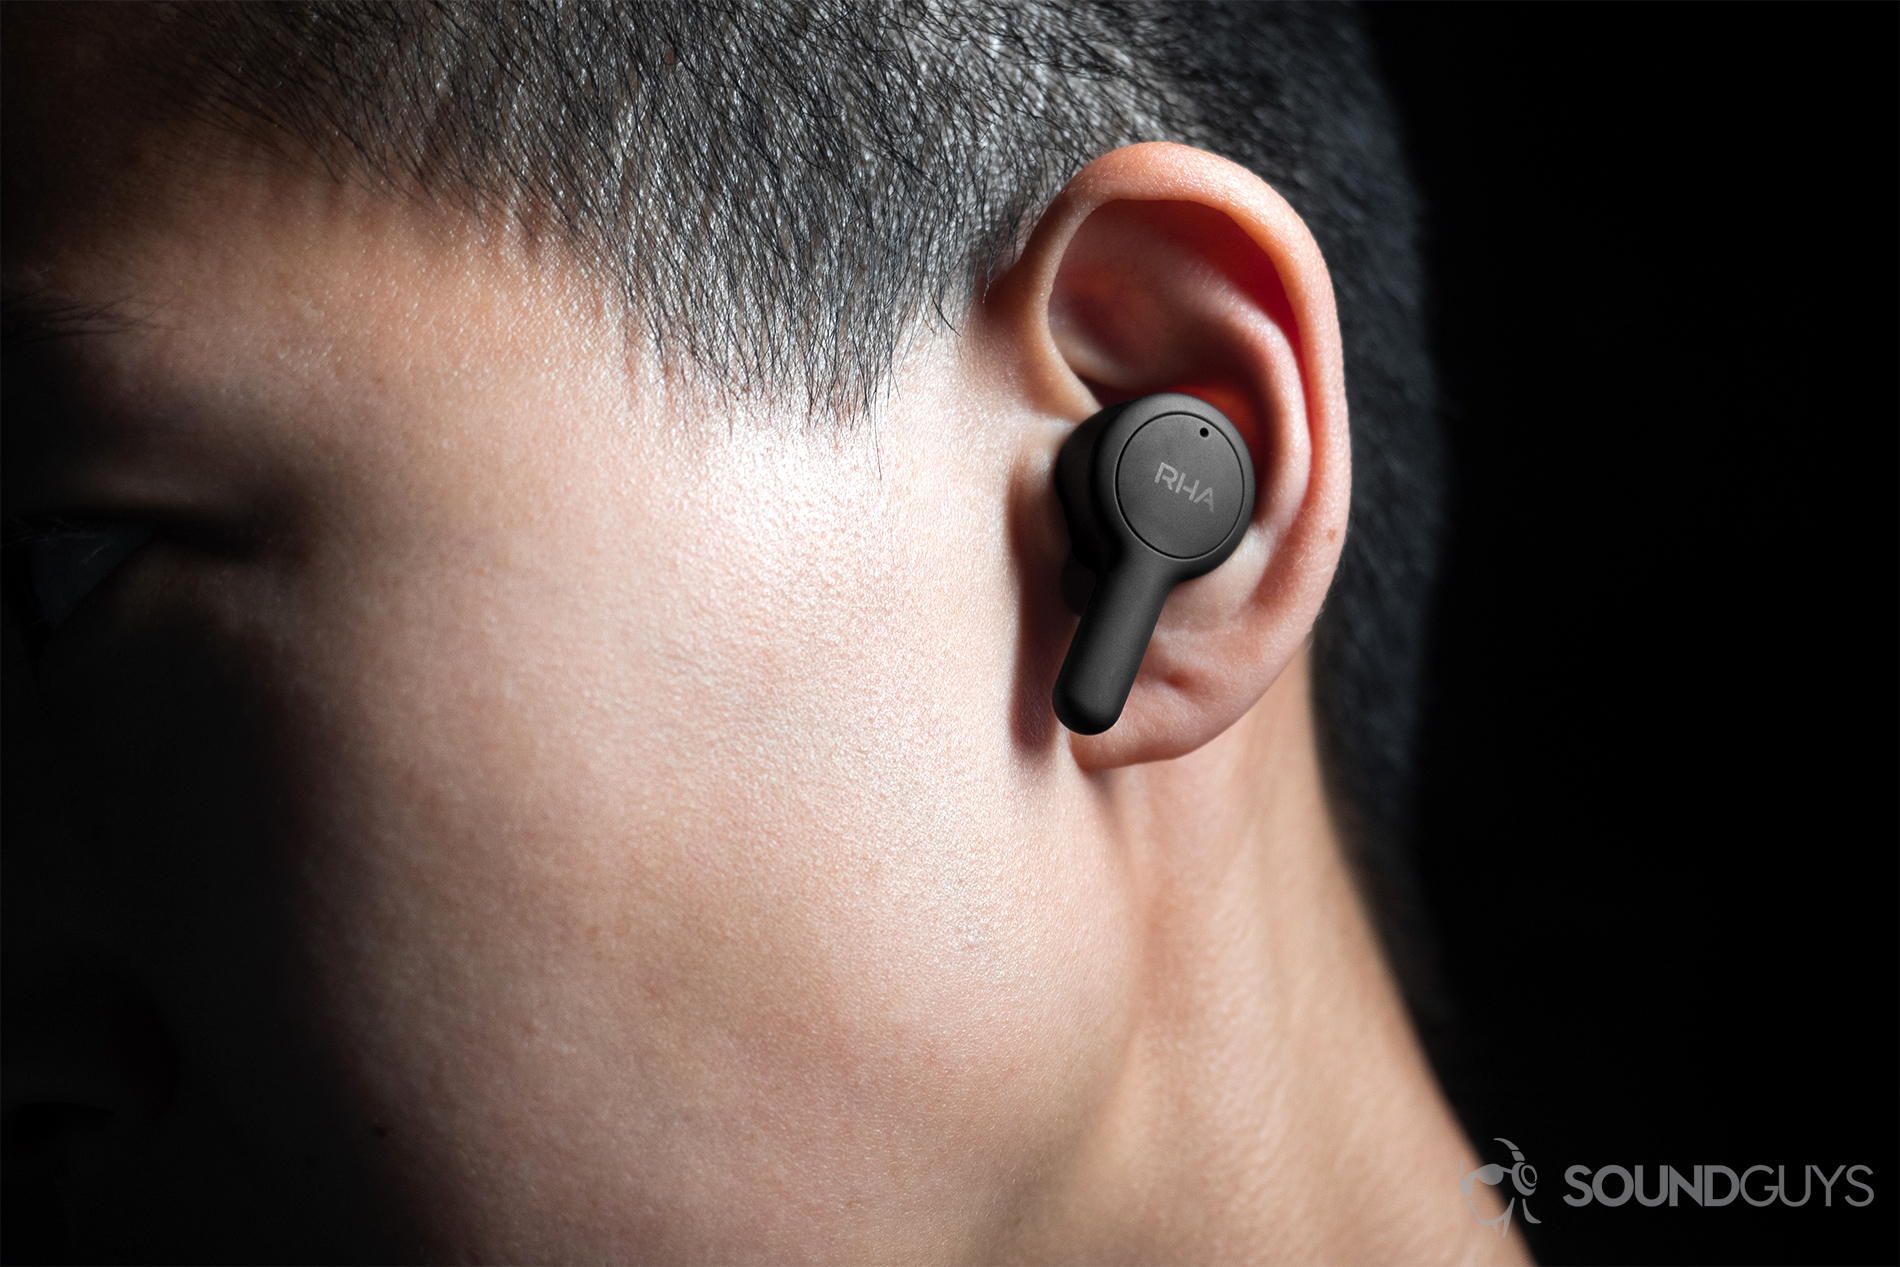 RHA TrueConnect: The left earbud being worn by a woman, it protrudes a bit from the ear with the stem angled downward.